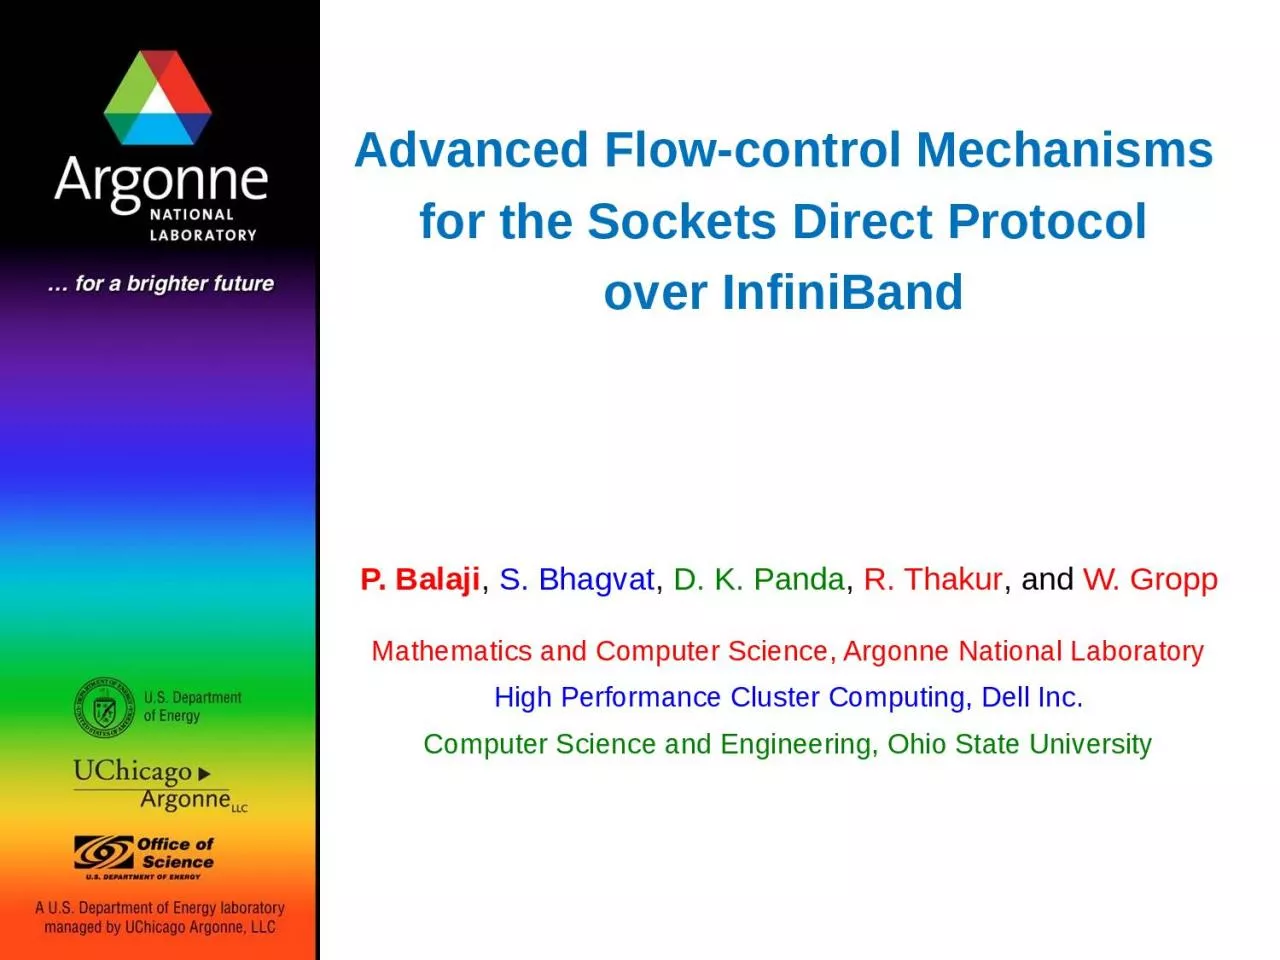 Advanced Flow-control Mechanisms for the Sockets Direct Protocol